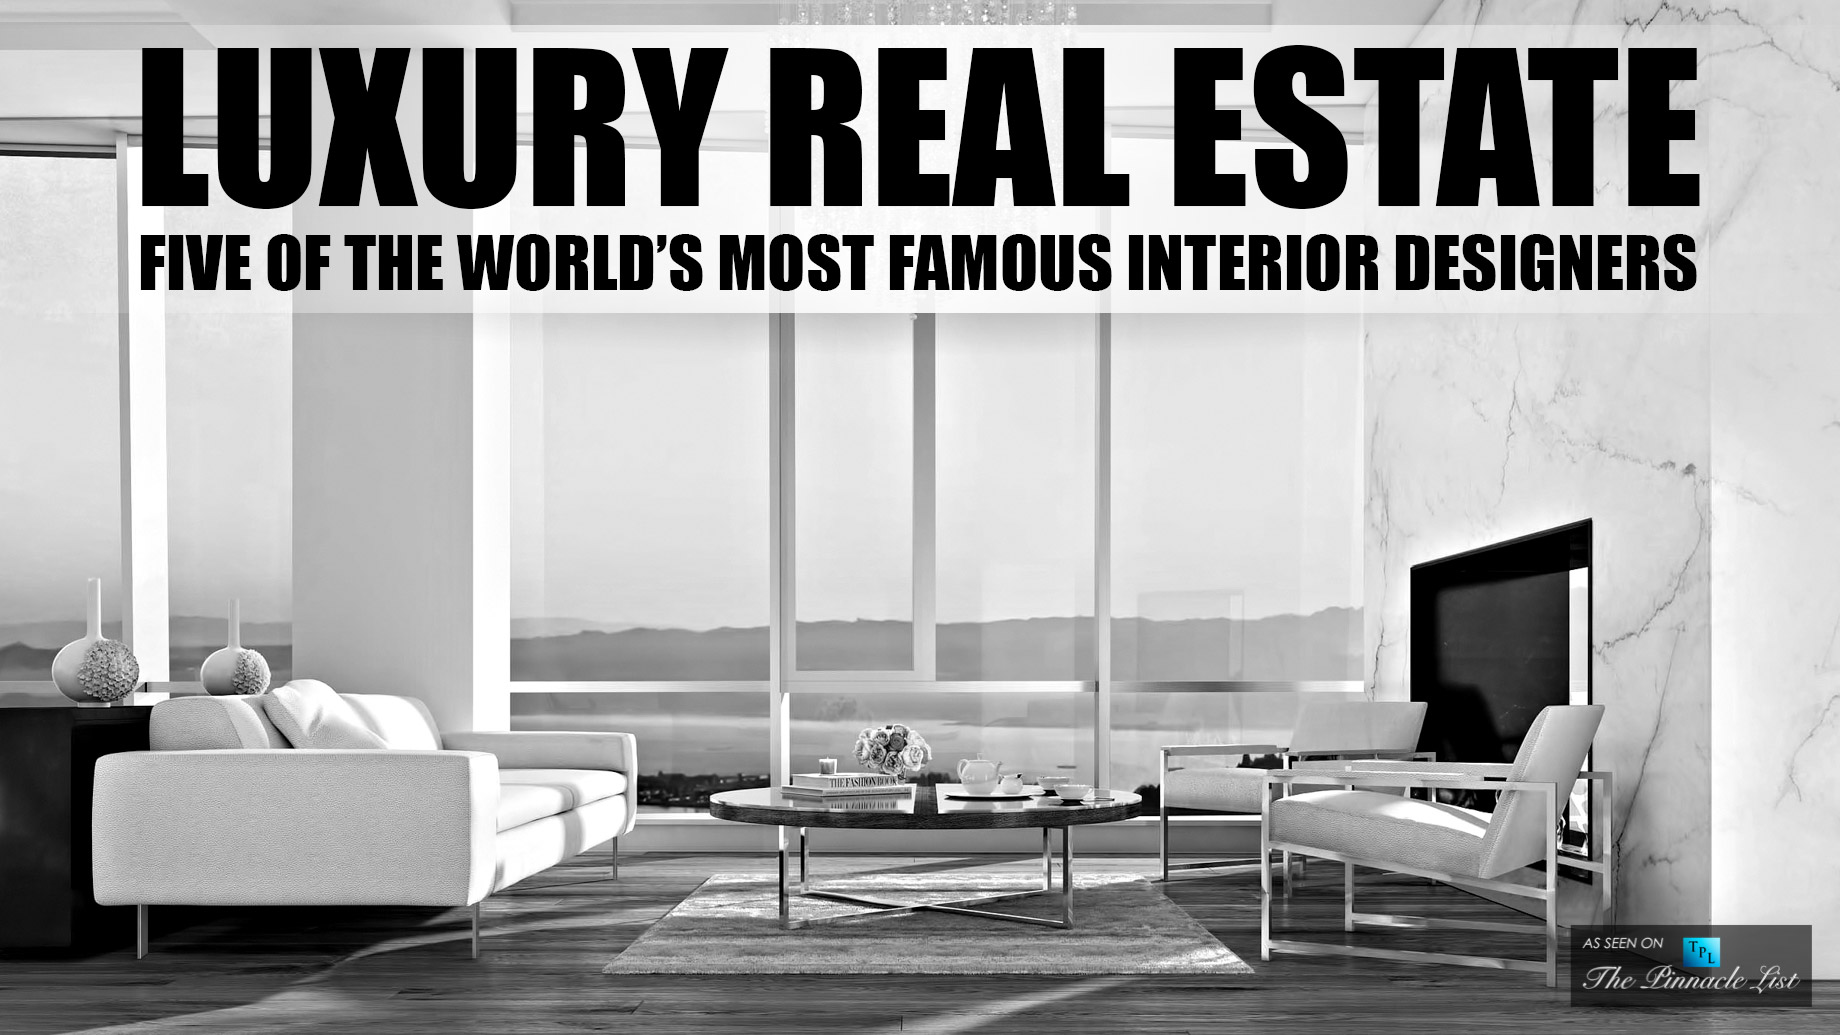 Luxury Real Estate – Five of The World’s Most Famous Interior Designers